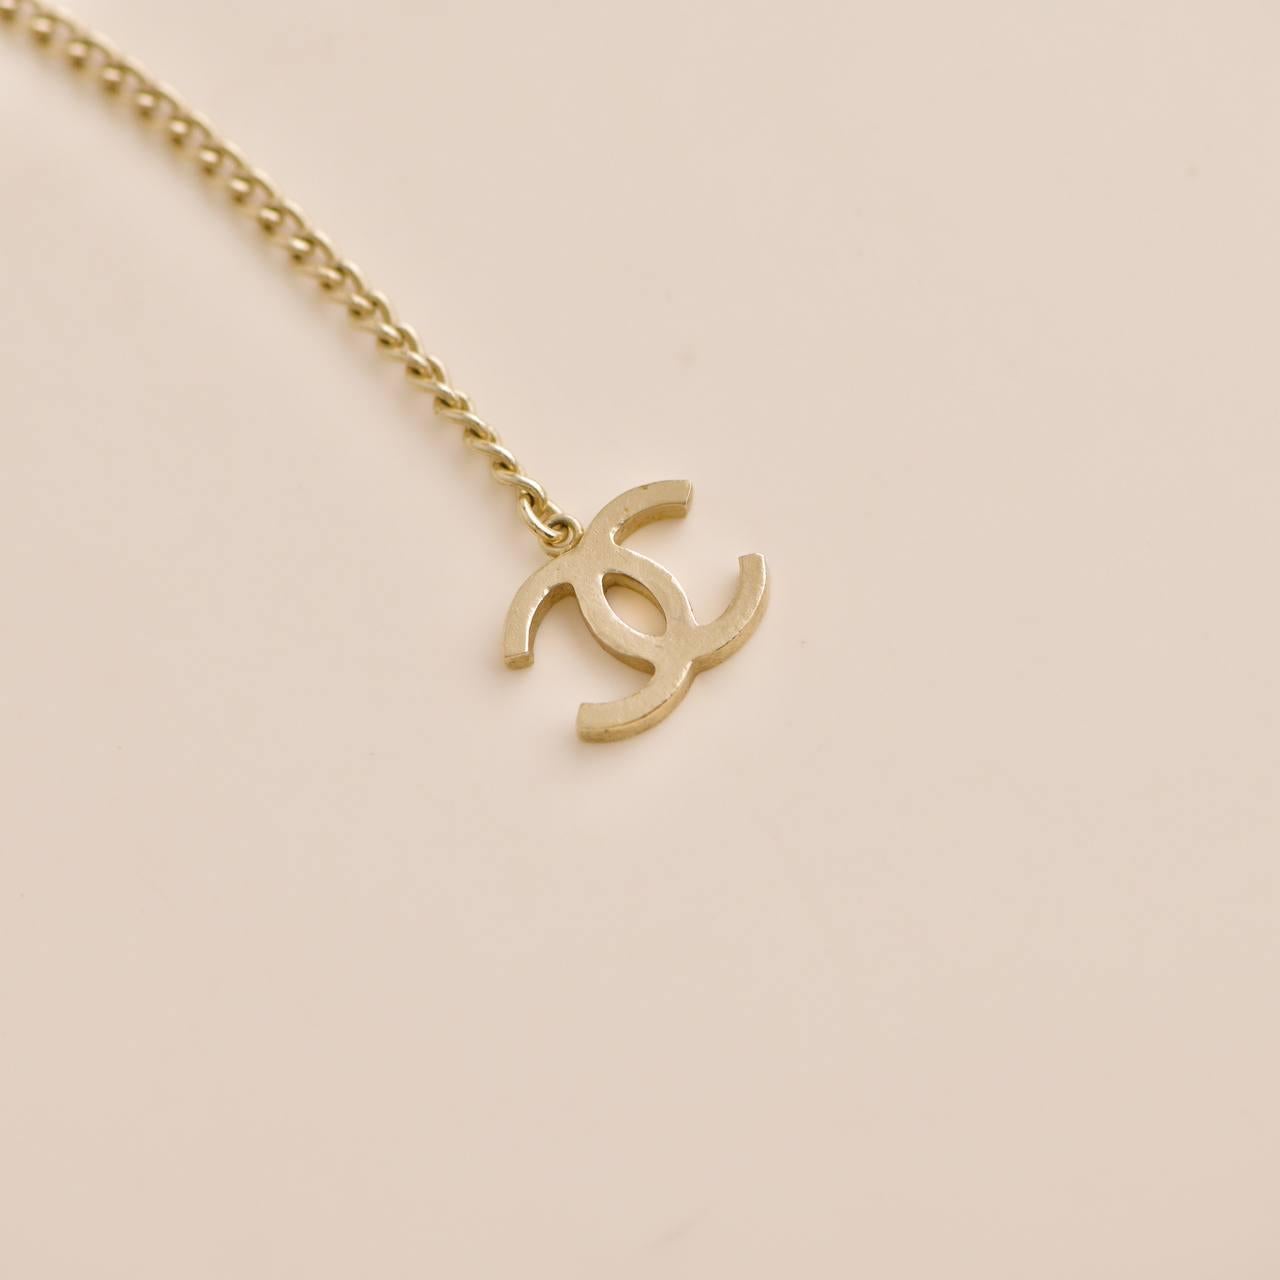 Chanel Coco Mademoiselle Figurine Enamel Gold Tone Necklace For Sale 3